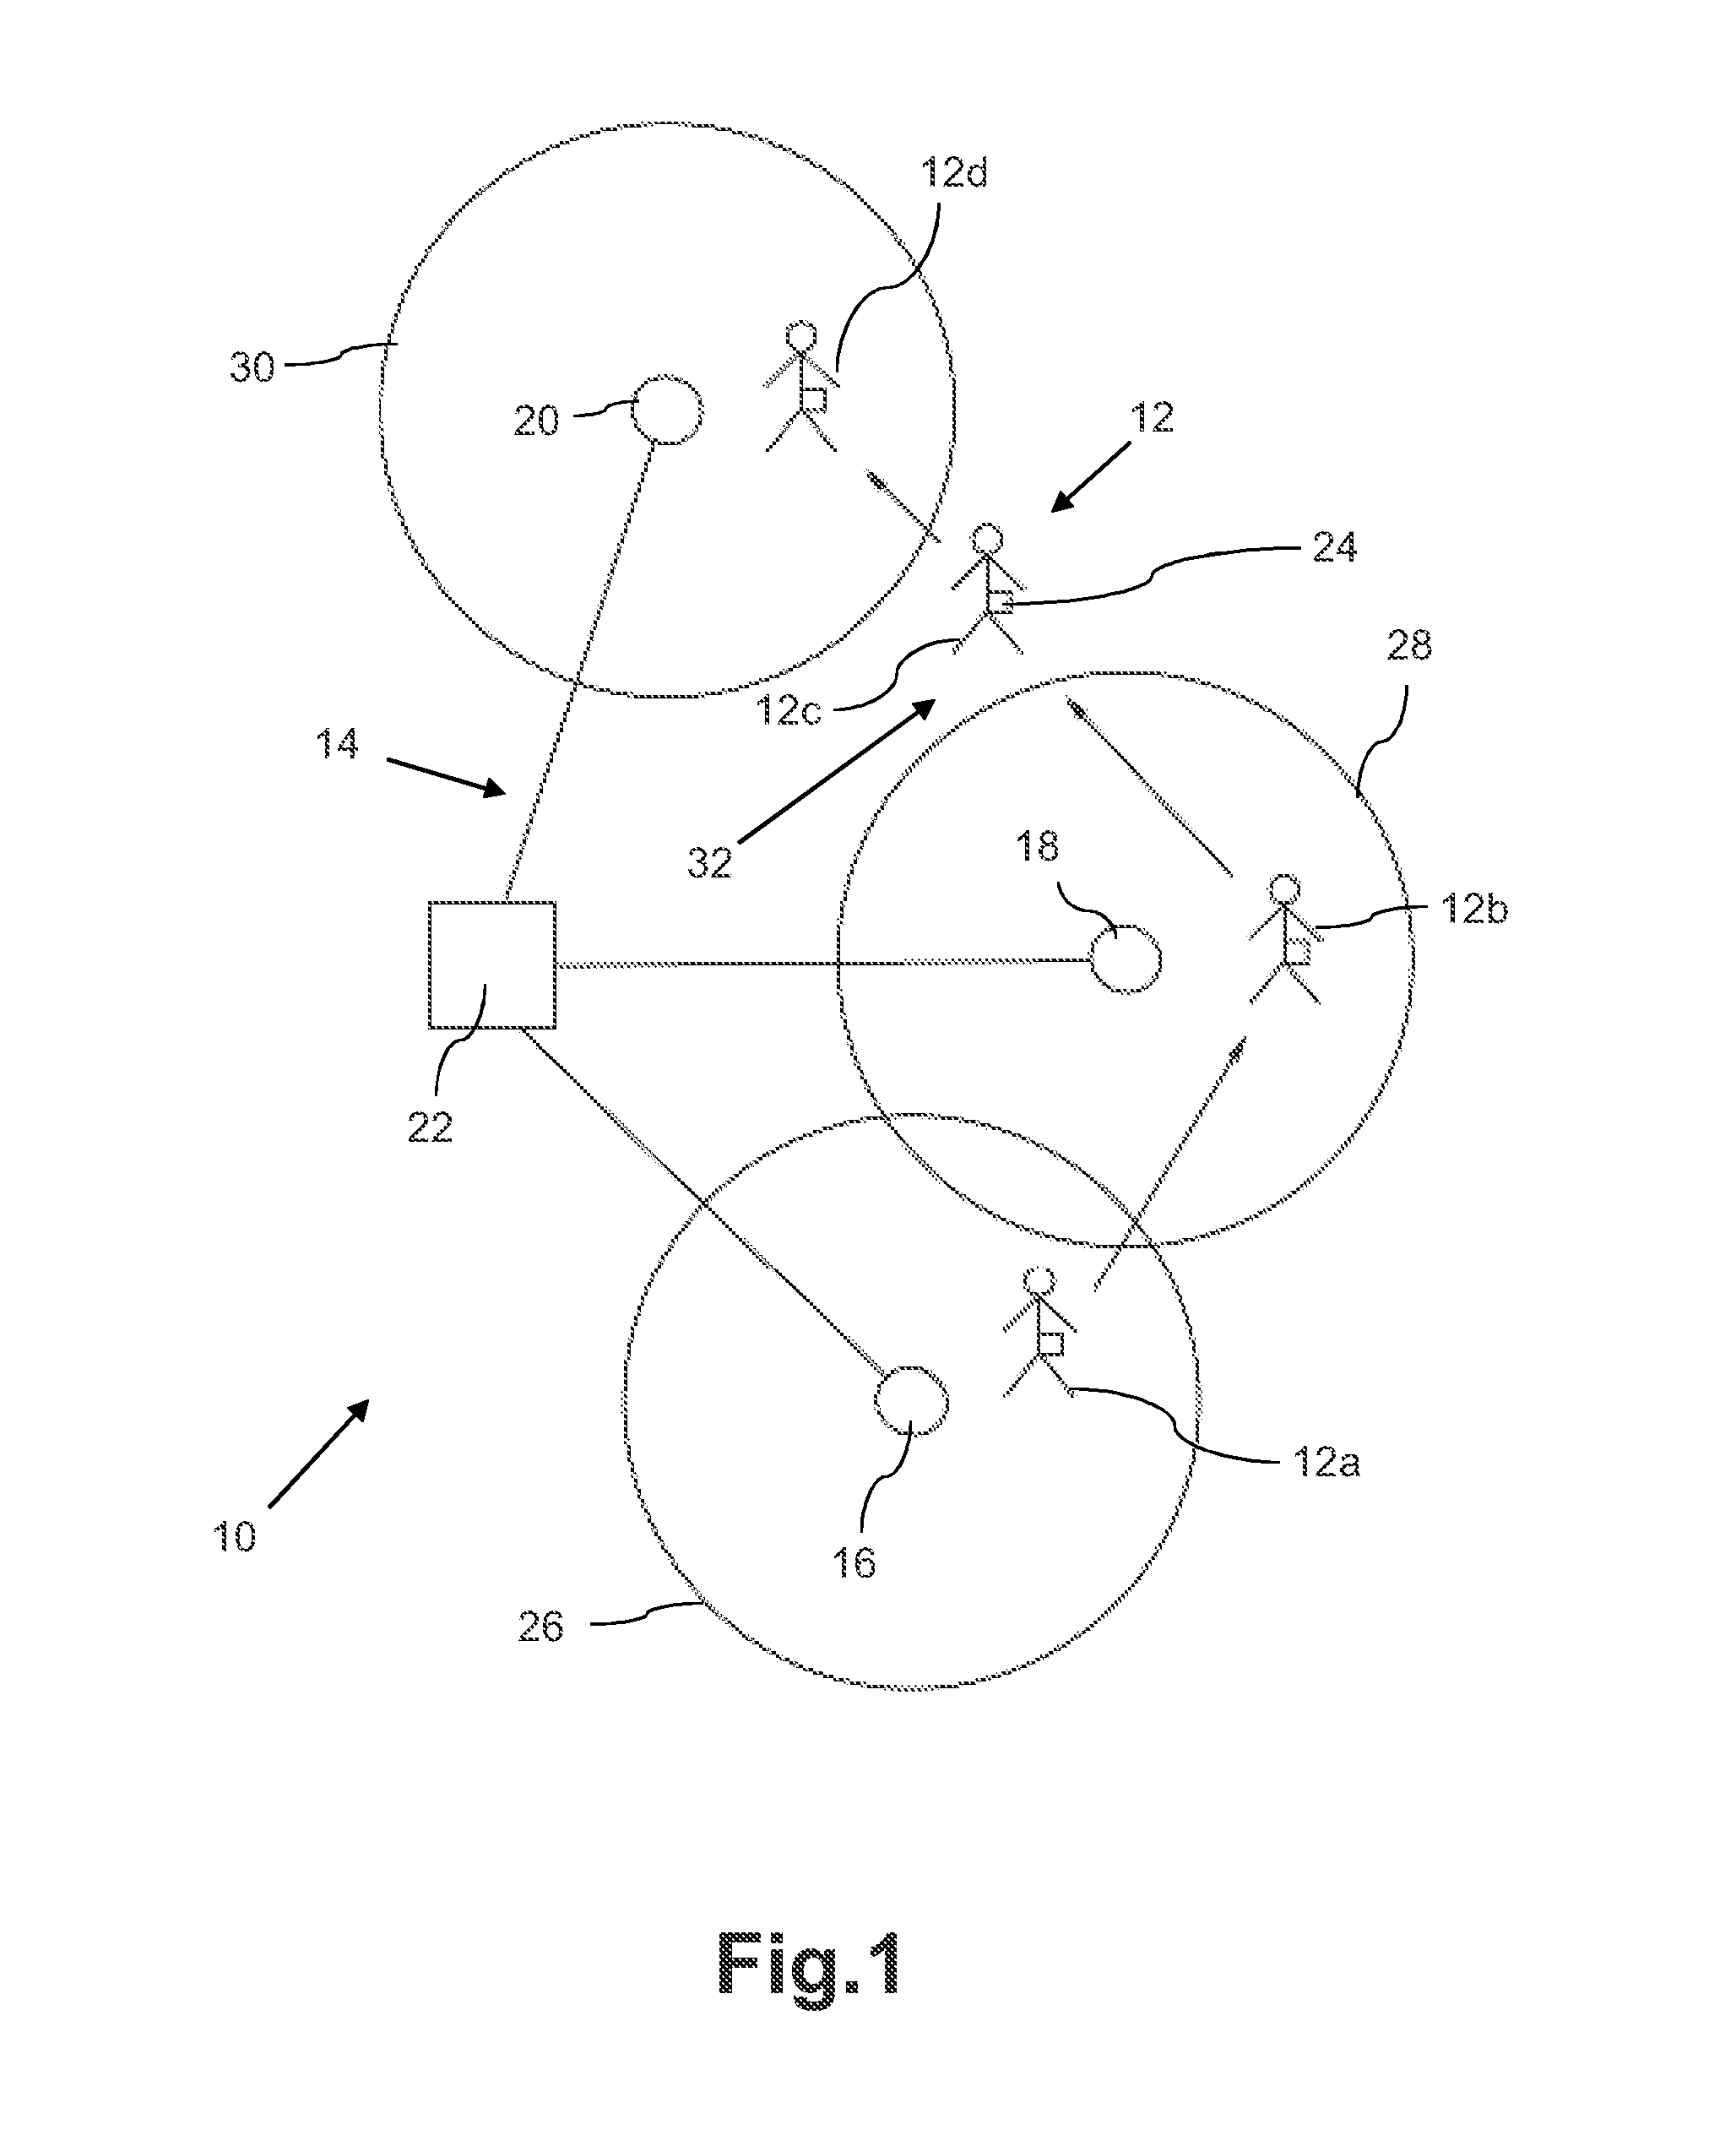 Patient monitoring system and method for monitoring the physiological status of a patient